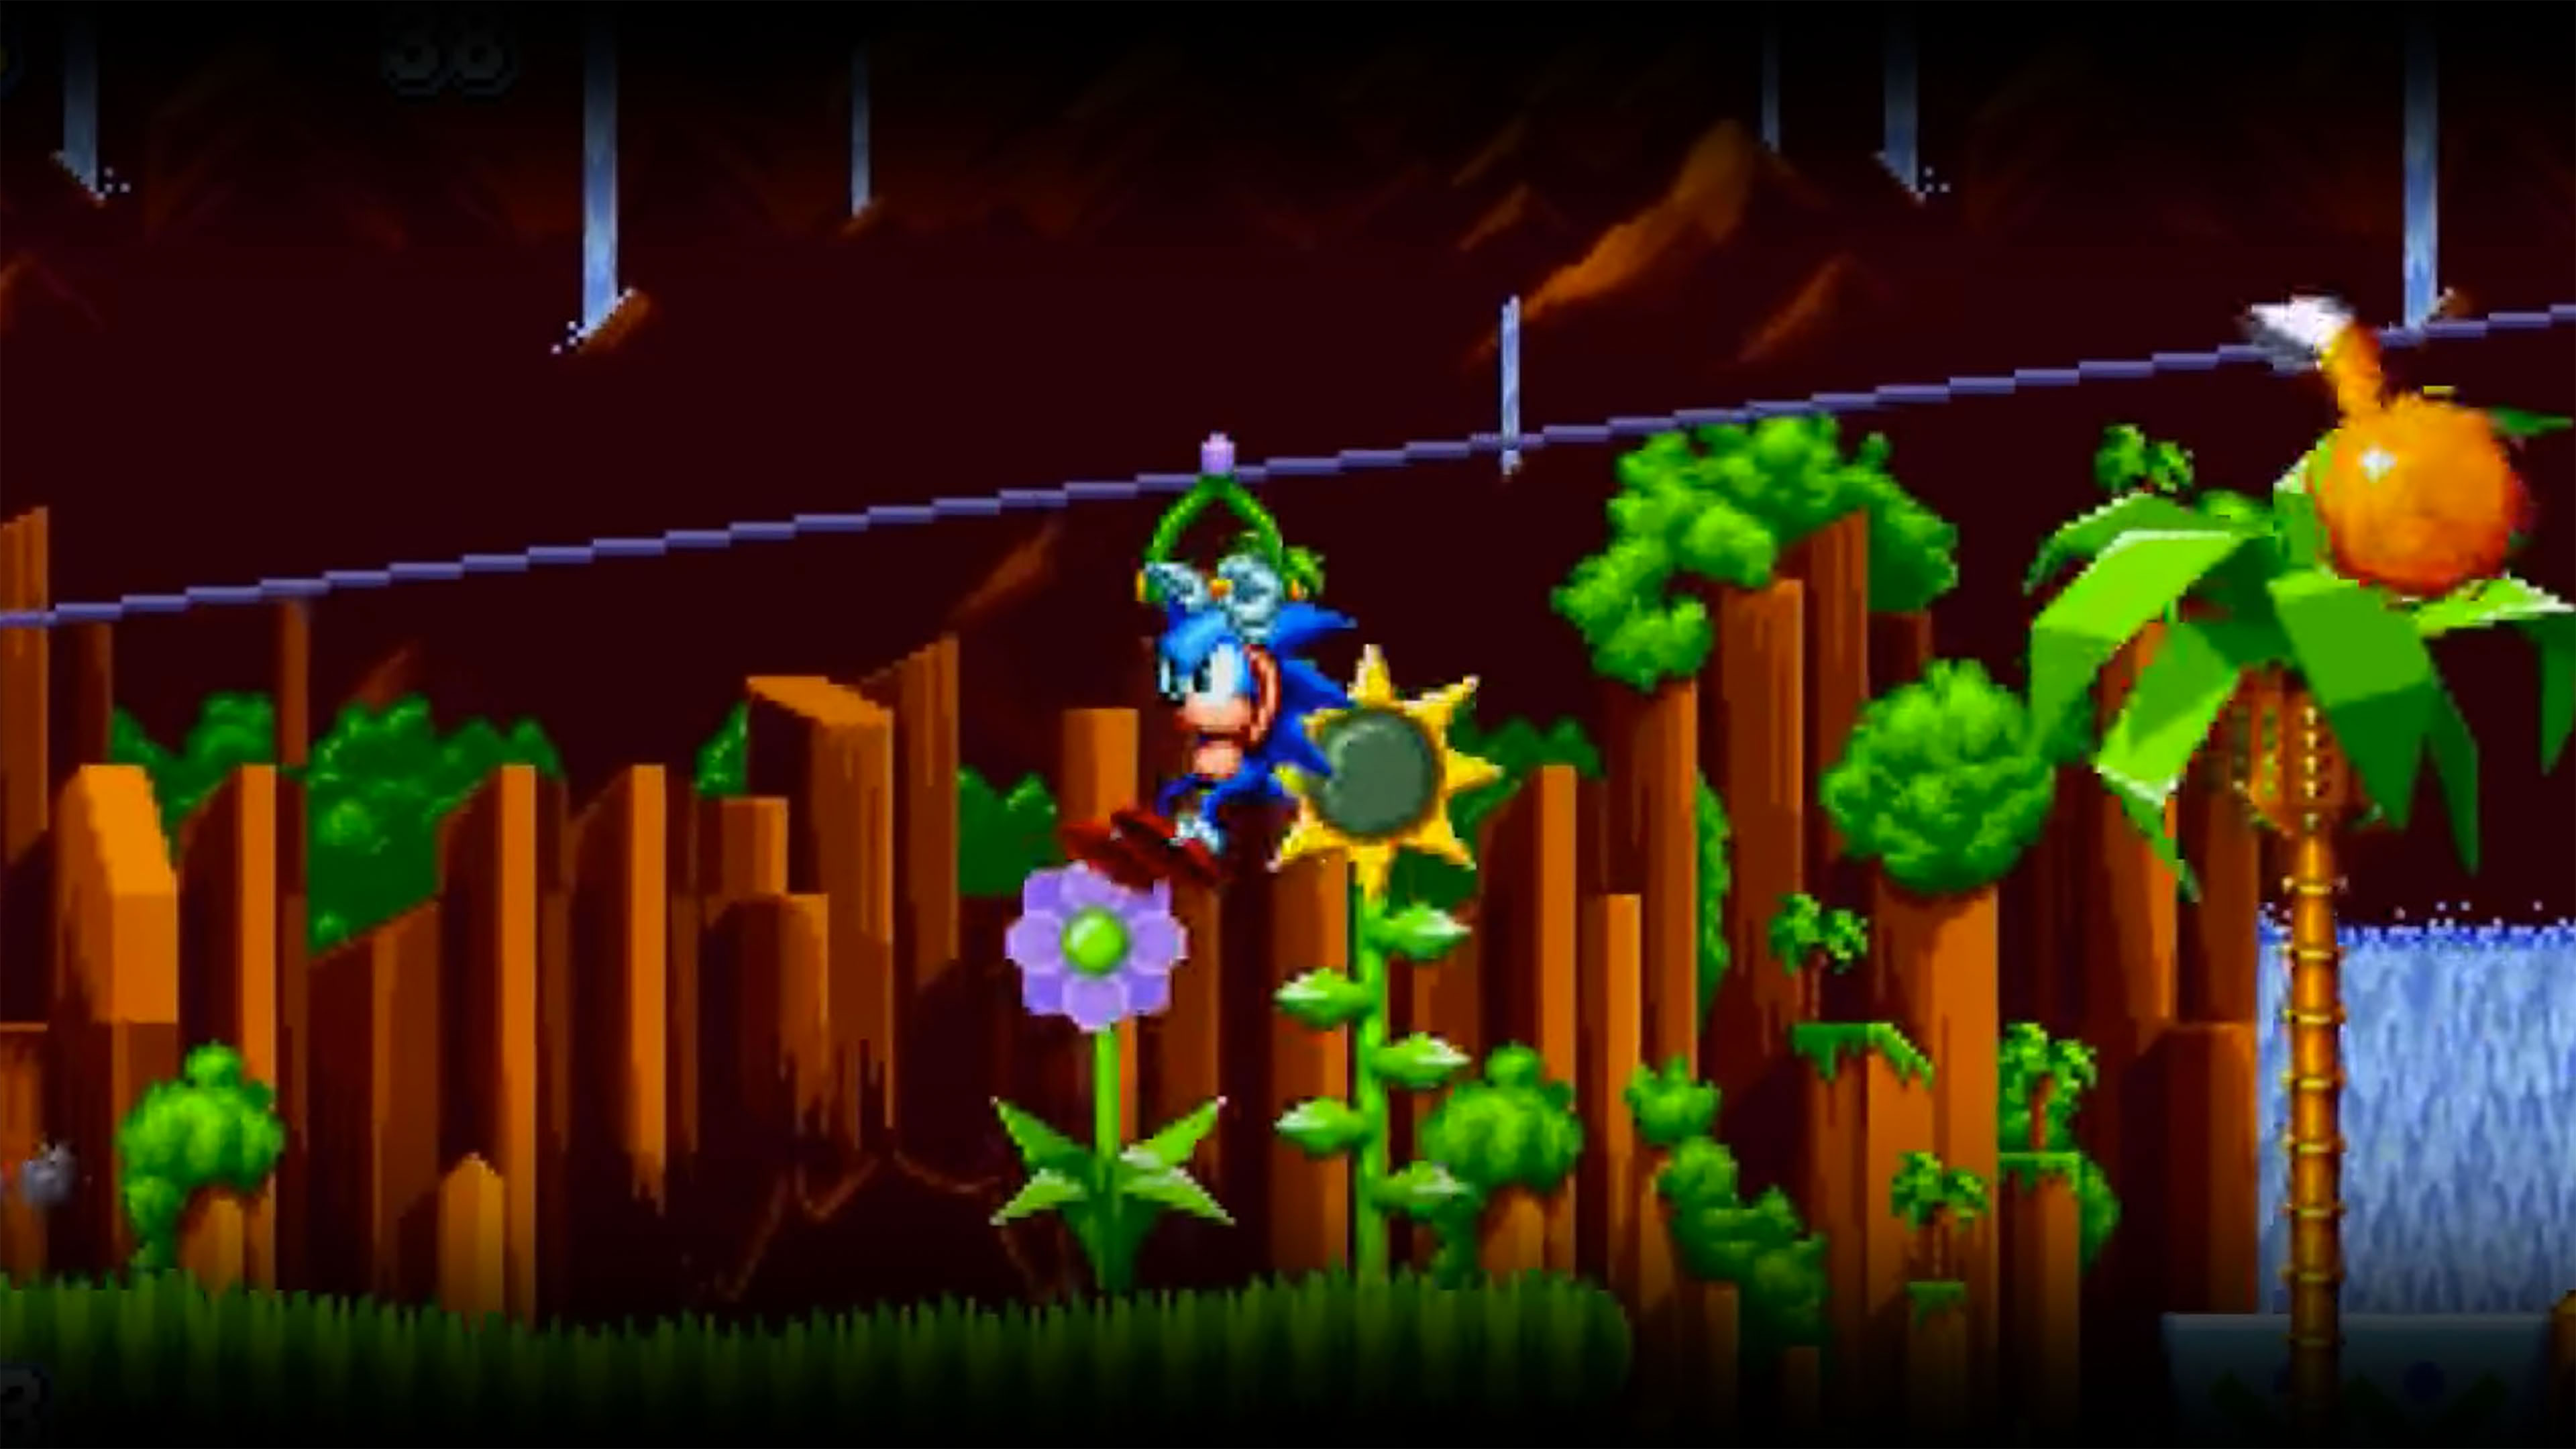 Sonic Mania Android Wallpapers - Wallpaper Cave